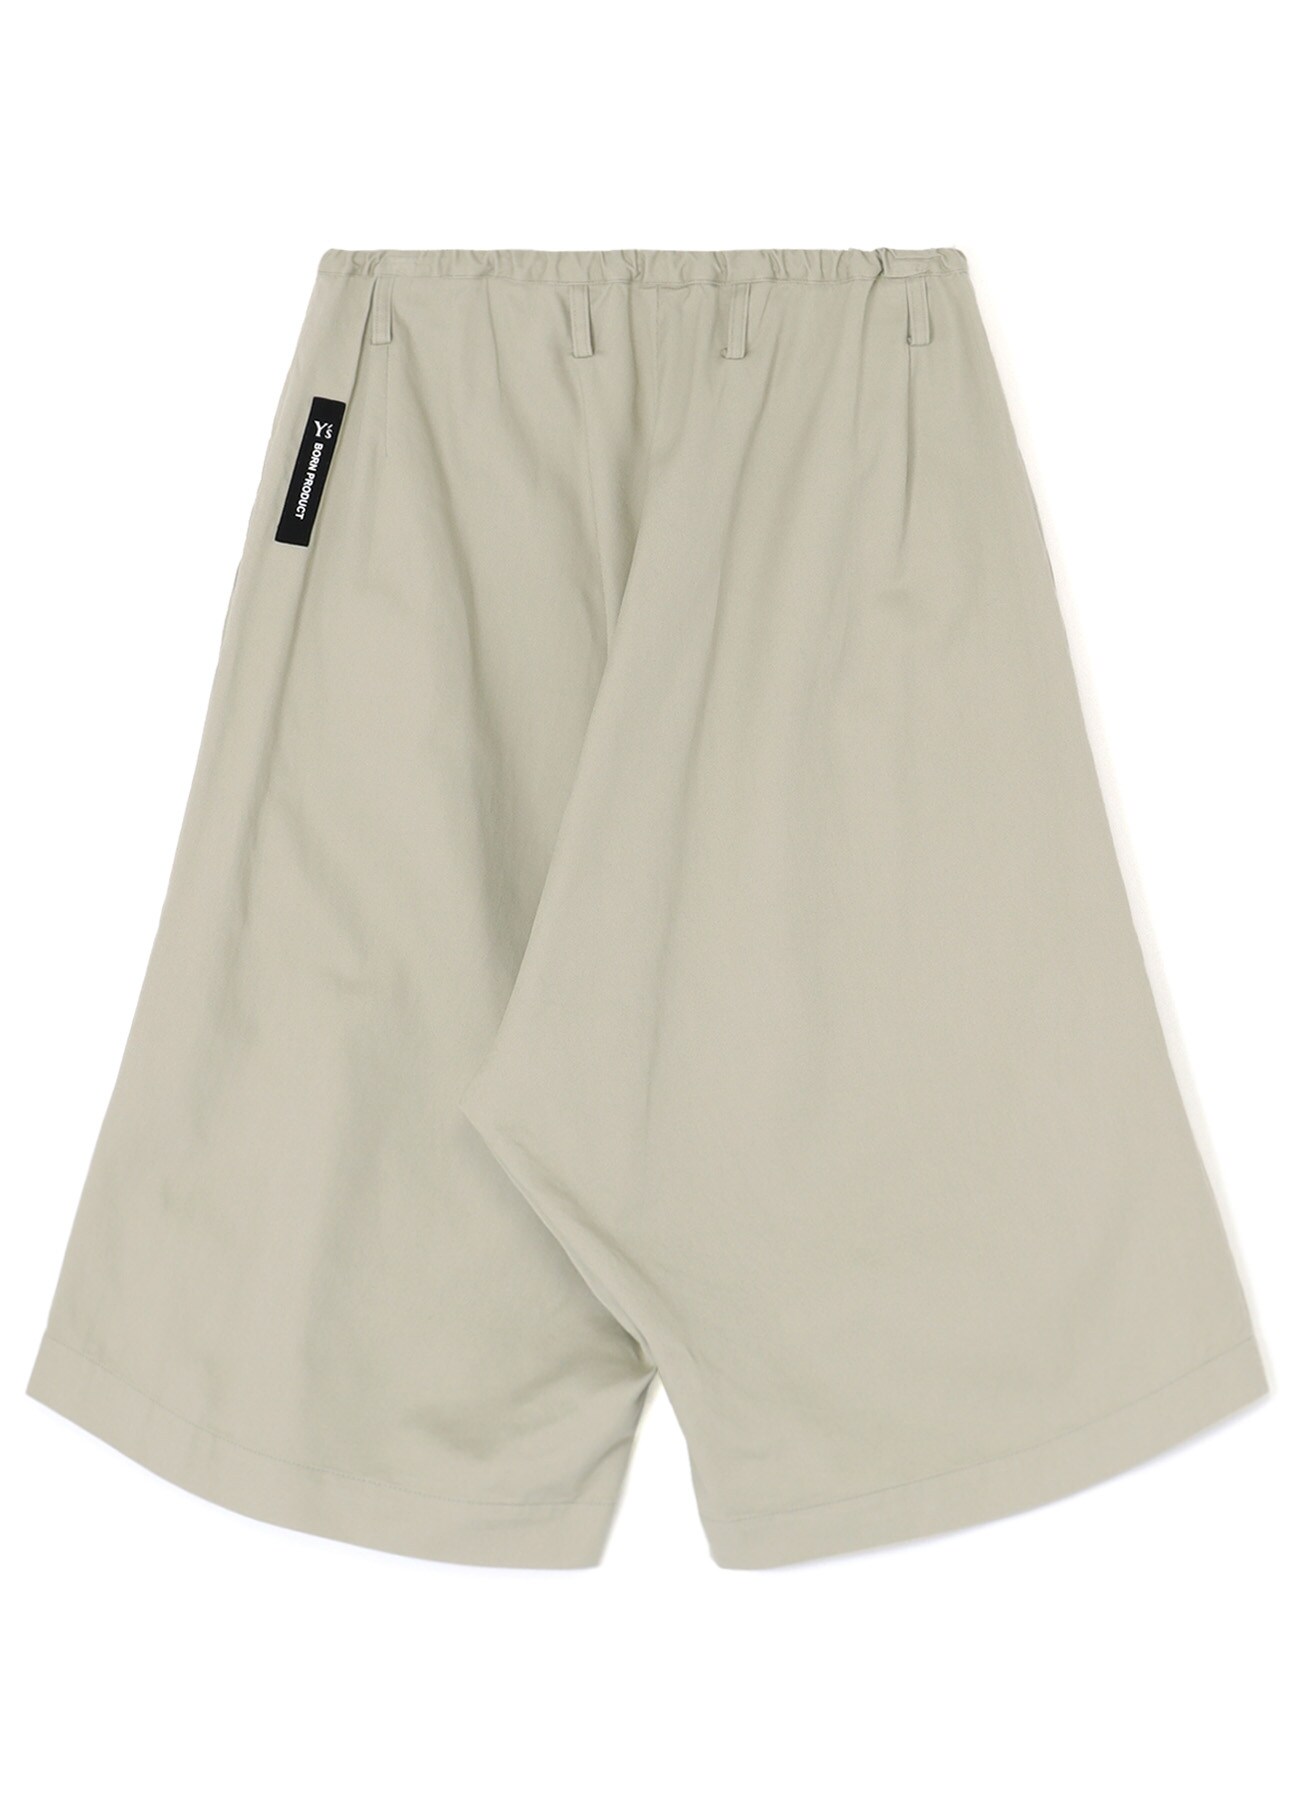 [Y's BORN PRODUCT]COTTON TWILL 3/4 LENGTH STRING PANTS